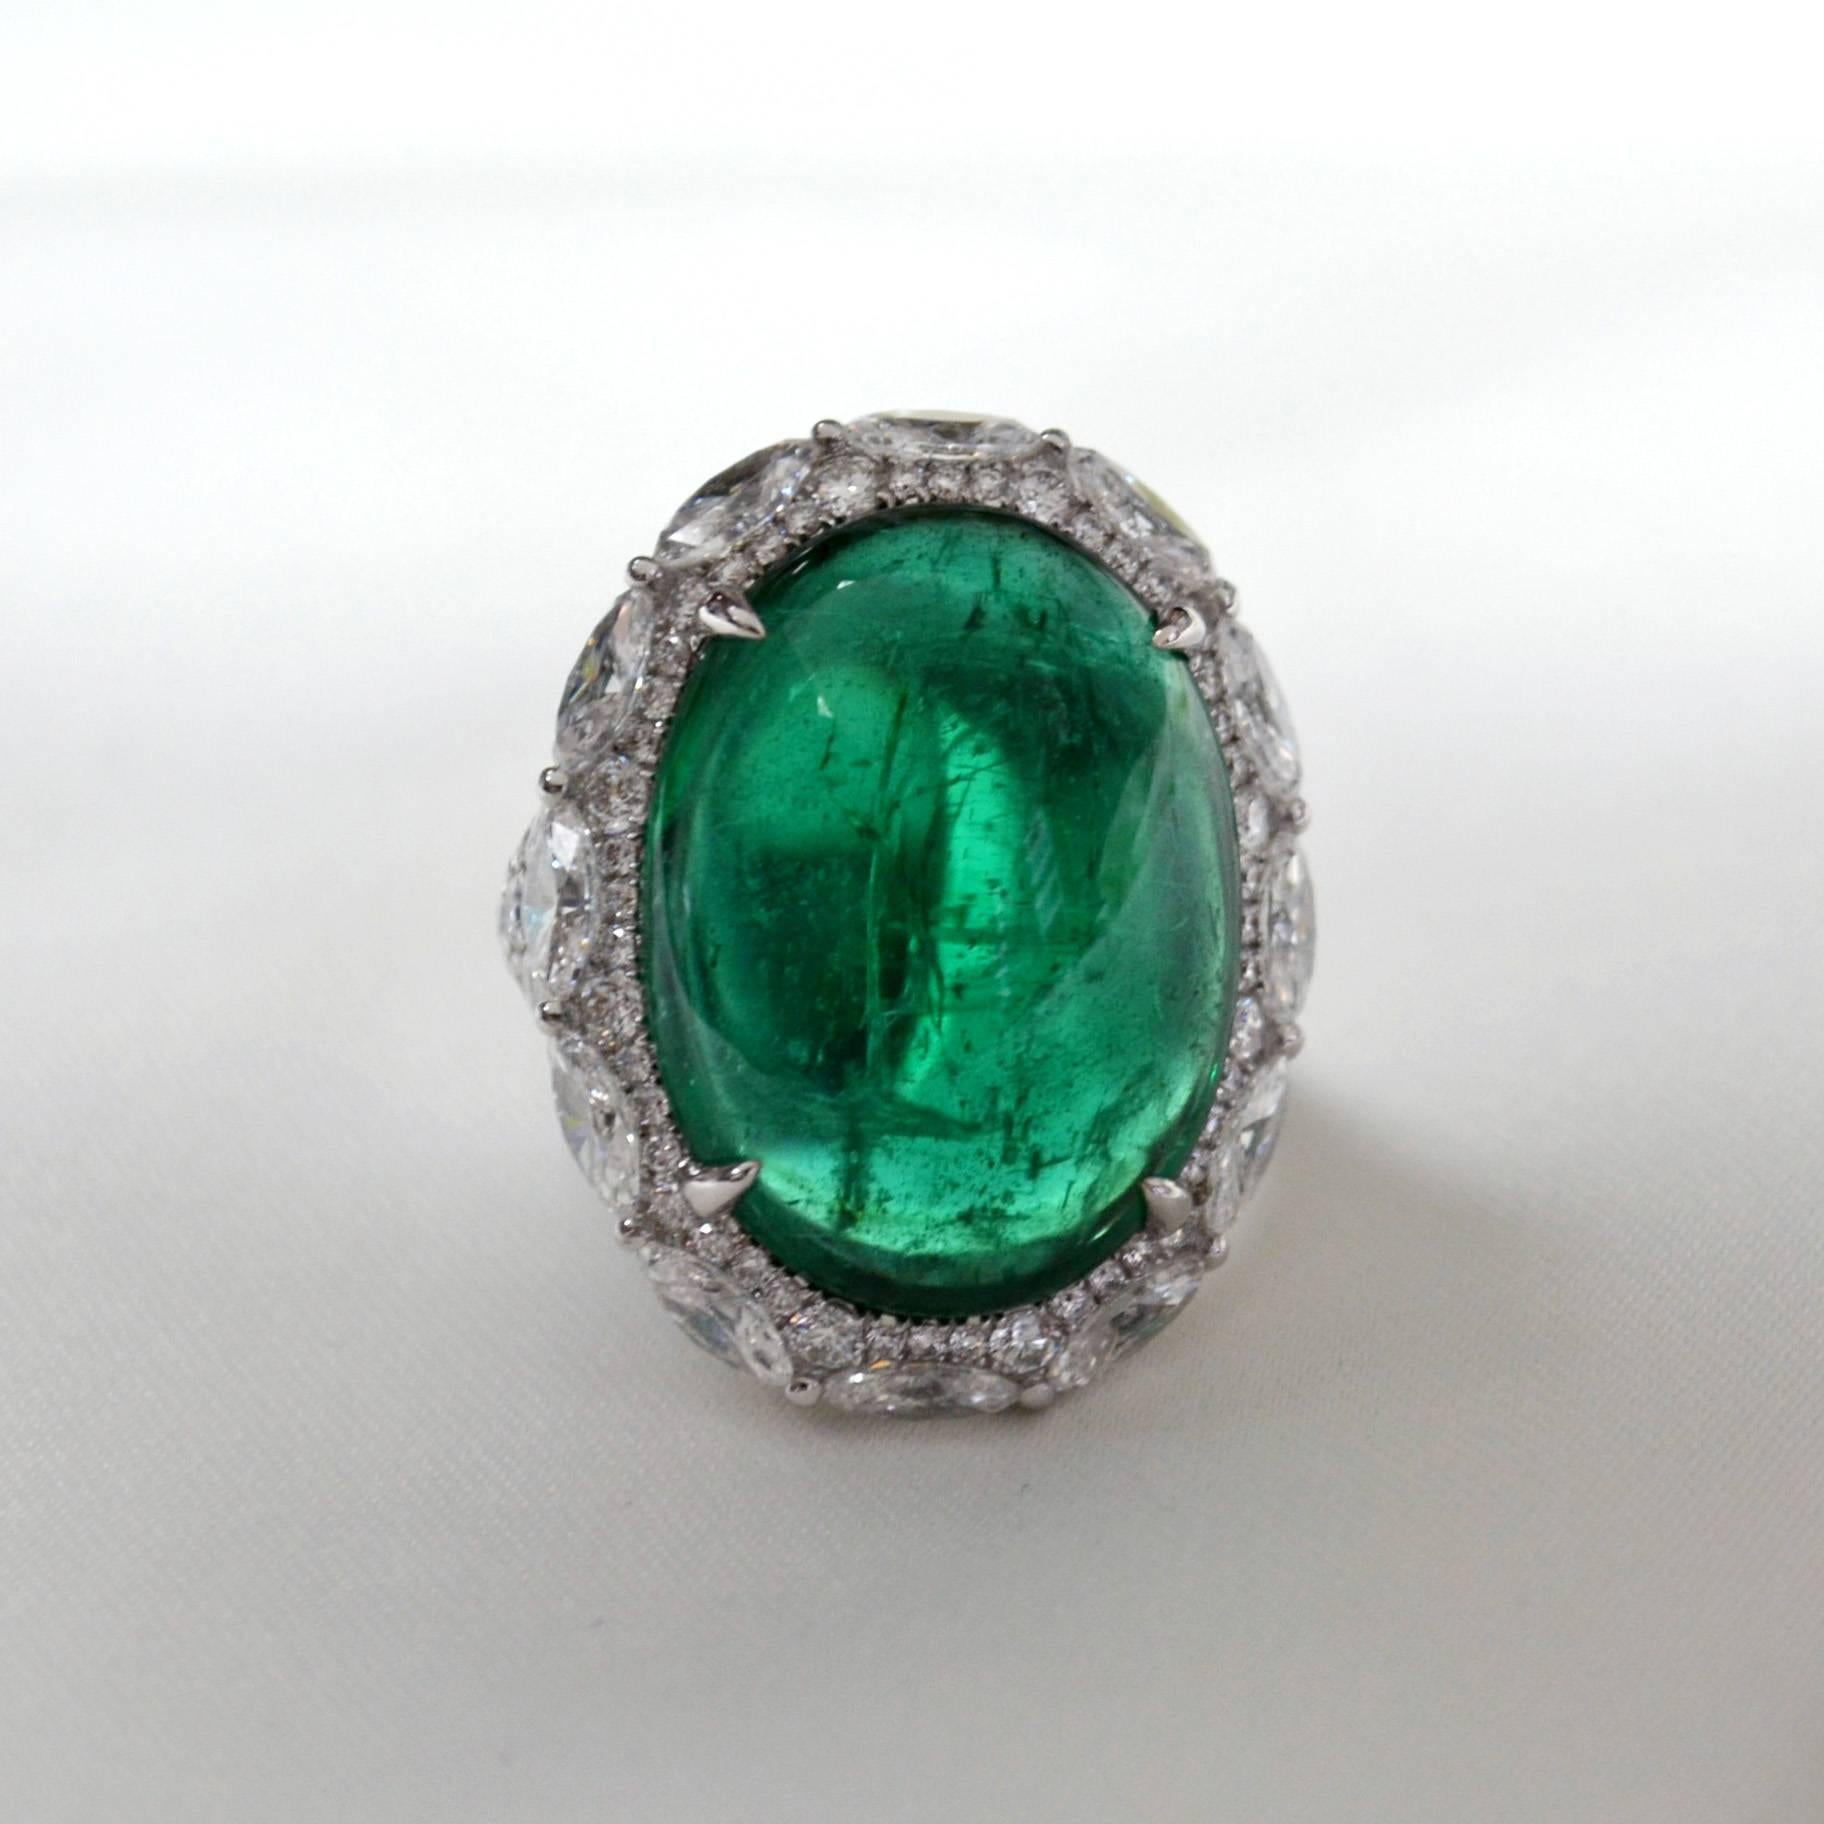 Ring in 18 karat white gold set with an intense green oval cabochon Zambian Emerald (21.49 carat), 12 marquise cut diamonds (2.76 carats) and 142 round brilliant-cut diamonds (2.53 carats). 

Includes Gemstone Report by C.Dunaigre, Switzerland.